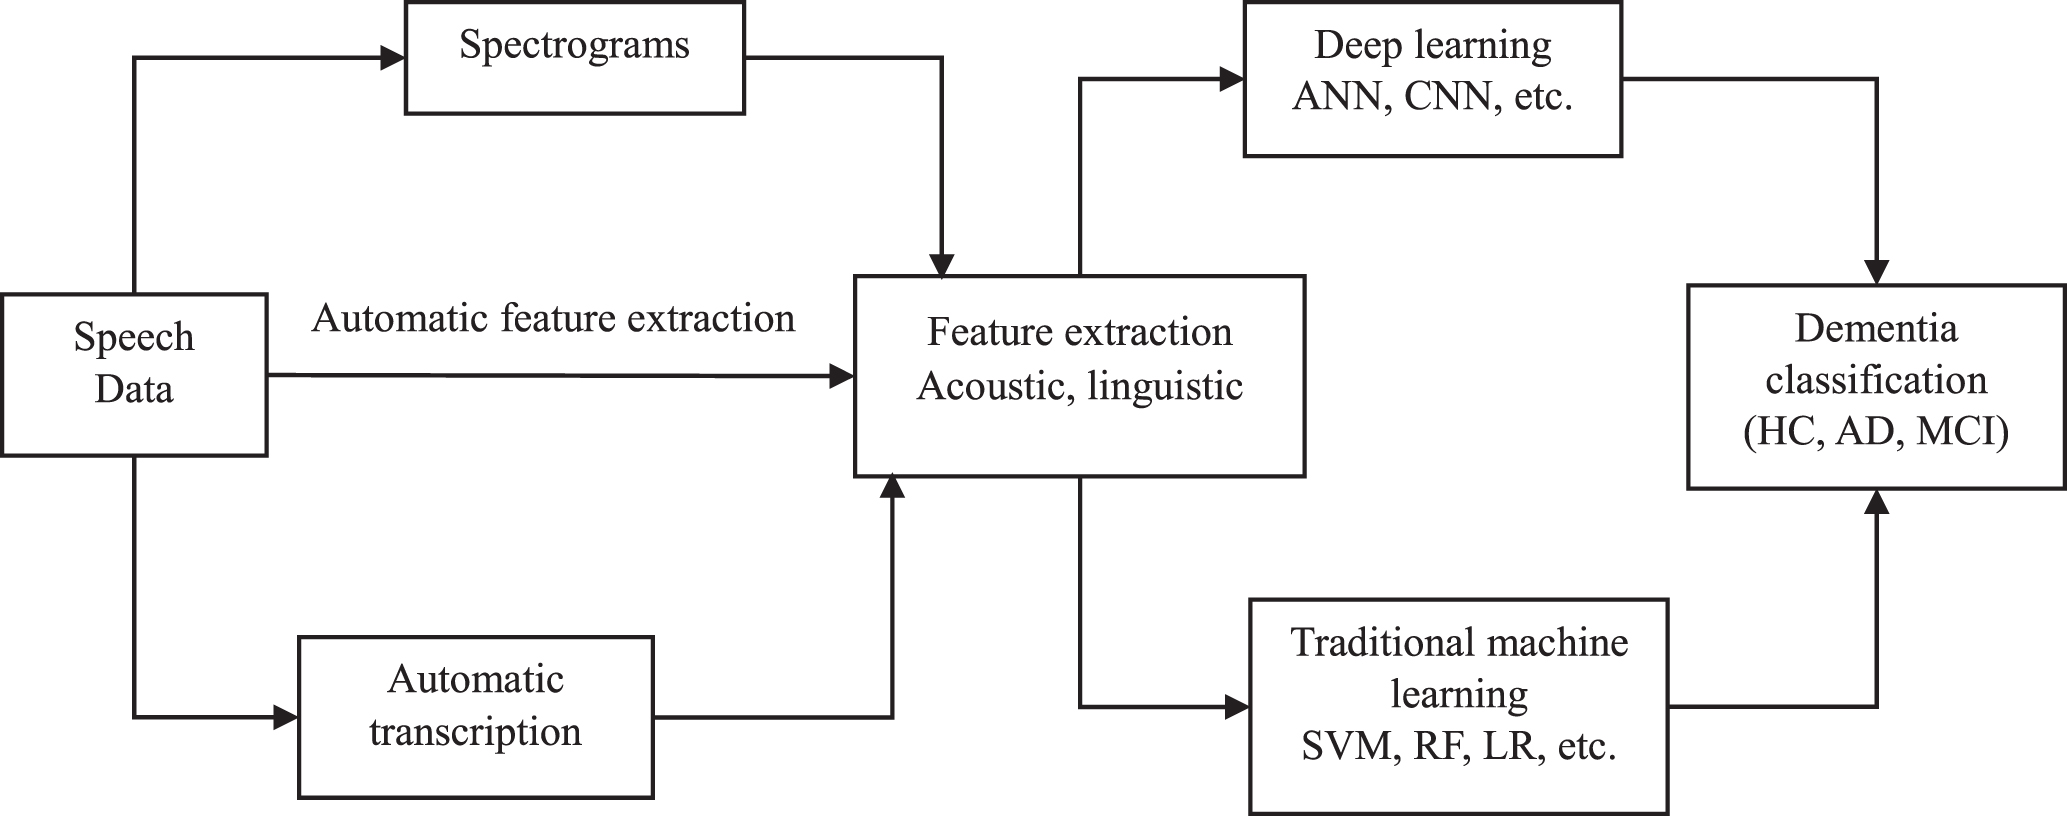 Overview of identified machine learning methodology for speech analysis. HC, healthy controls; AD, Alzheimer’s disease; MCI, mild cognitive impairment; SVM, support vector machine; LR, Logistic regression; RF, Randomforest; ANN, Artificial neural network; CNN, Convolutional neural network.